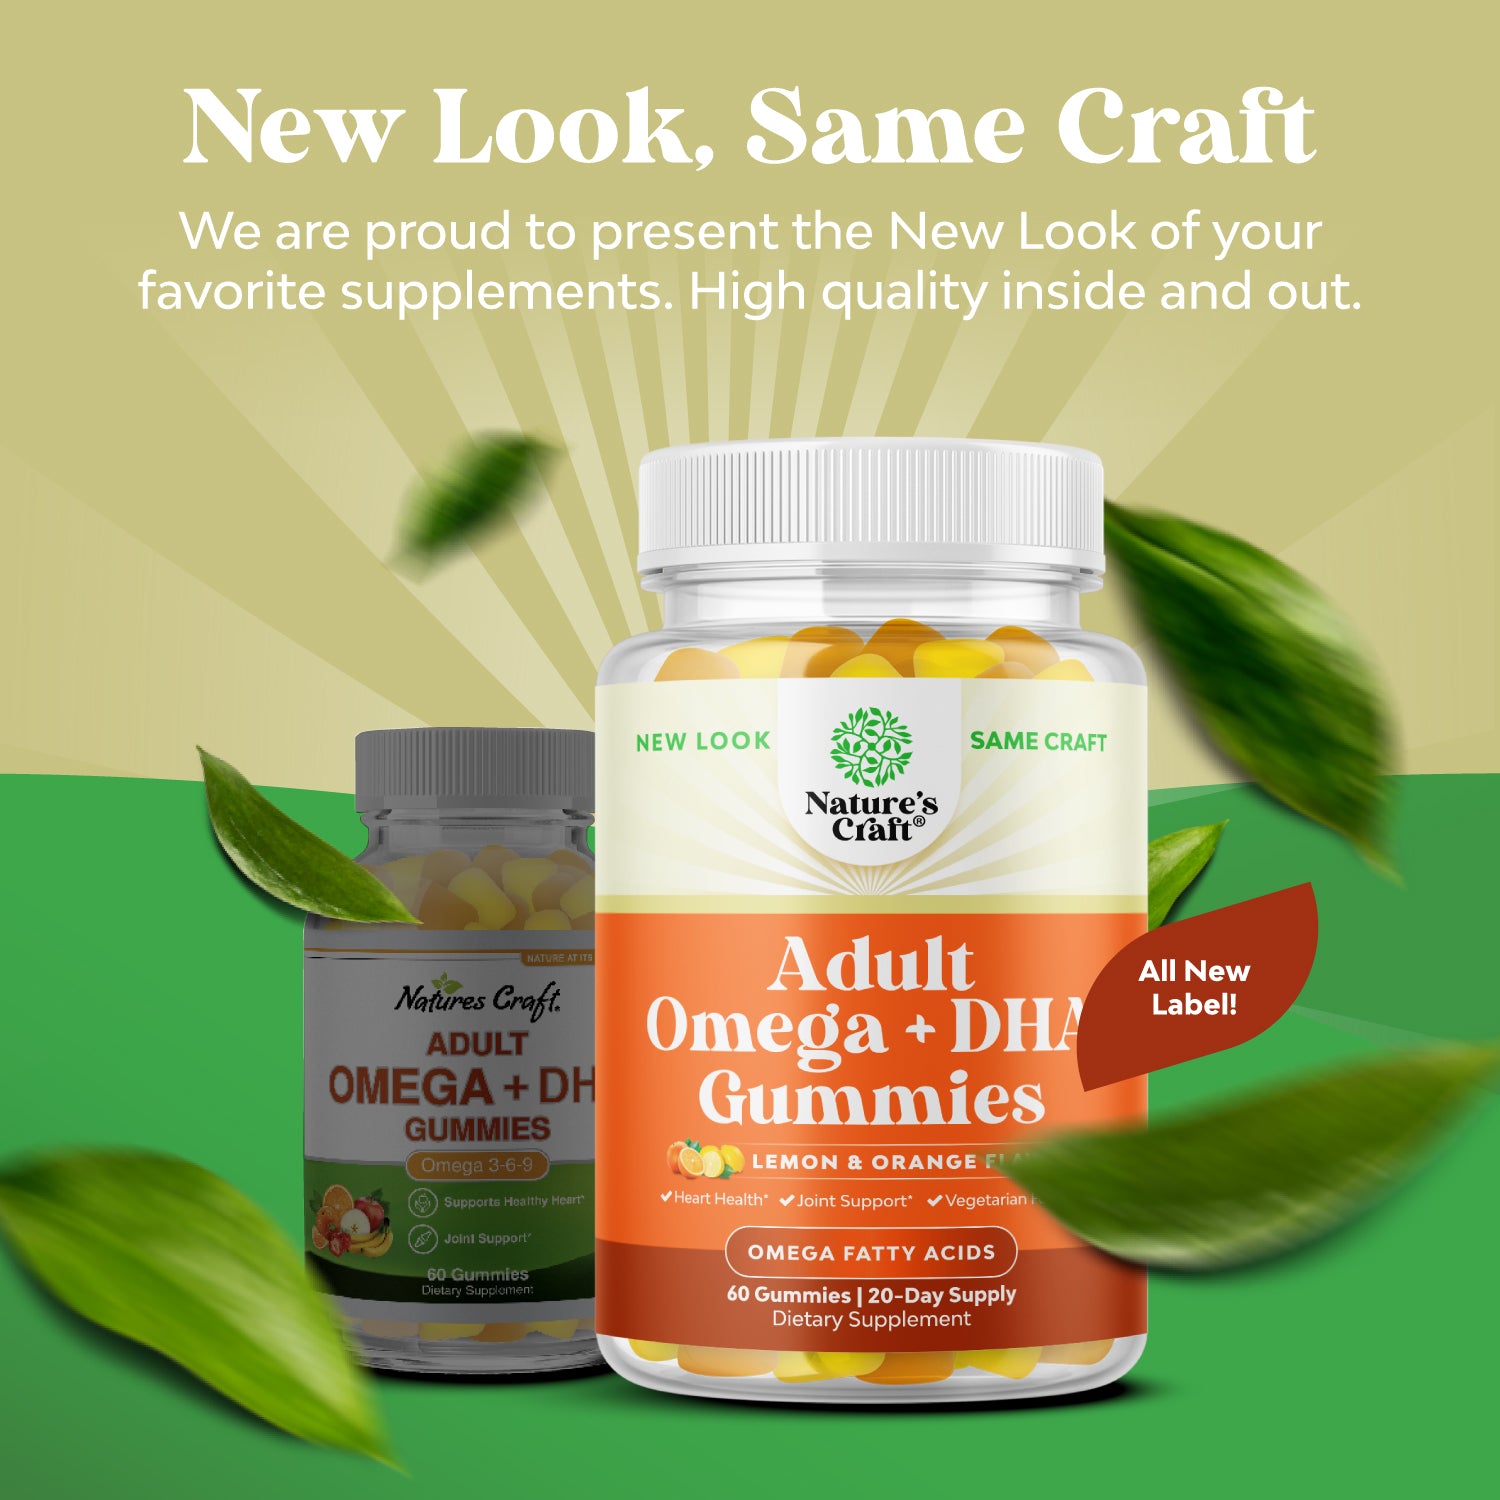 Omega 3 & DHA for Adults - 60 Gummies - Nature's Craft